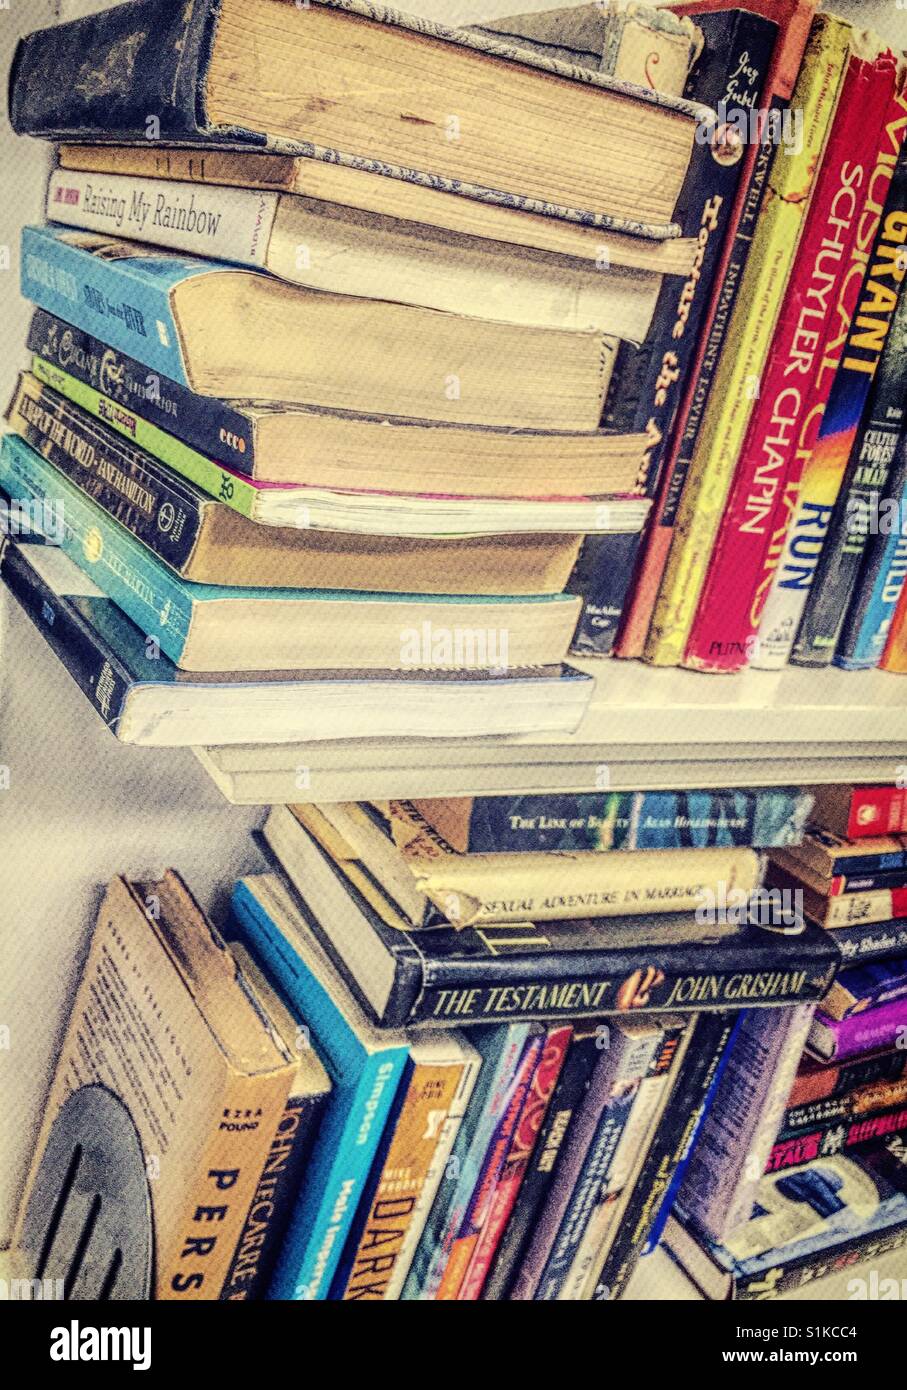 Books, hardback and paperback on cluttered shelves, USA Stock Photo